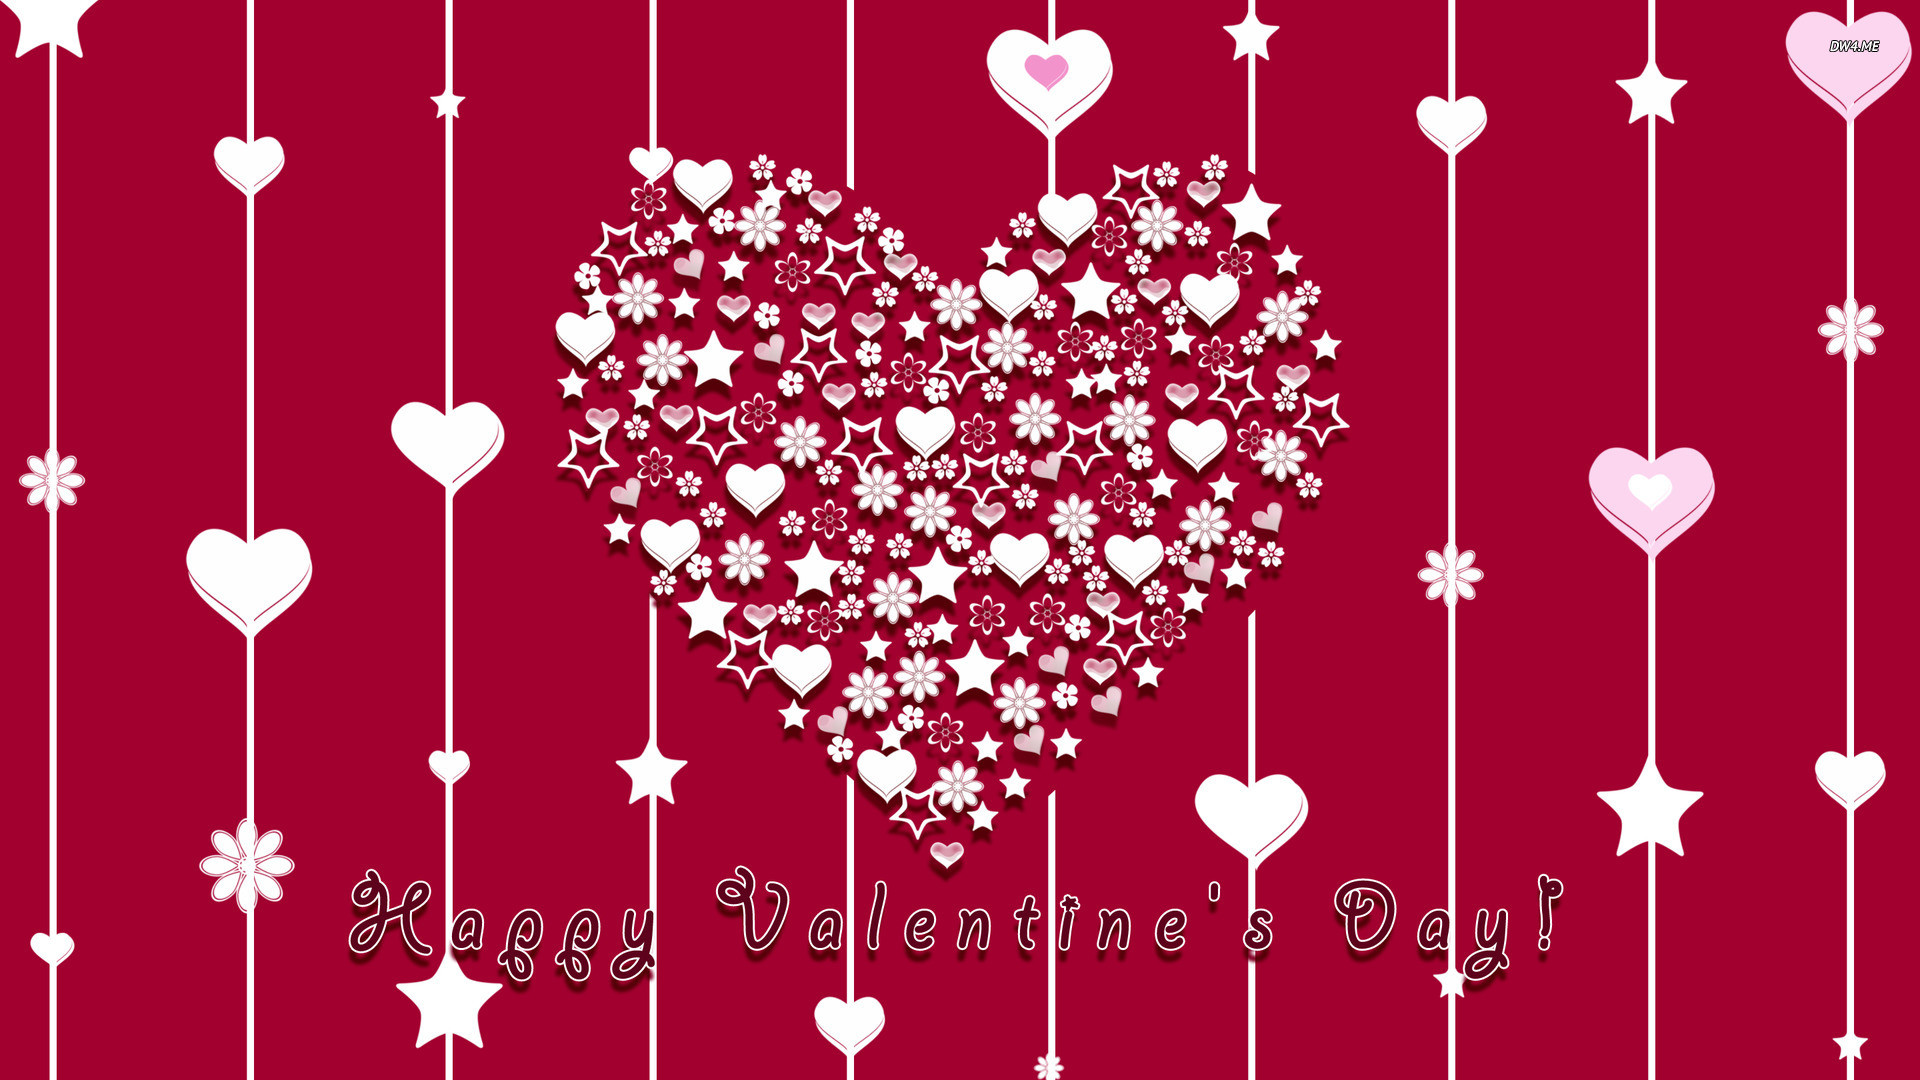 Happy Valentines Day Check Out More Exciting HD Wallpapers, Covers, and DPs for Social